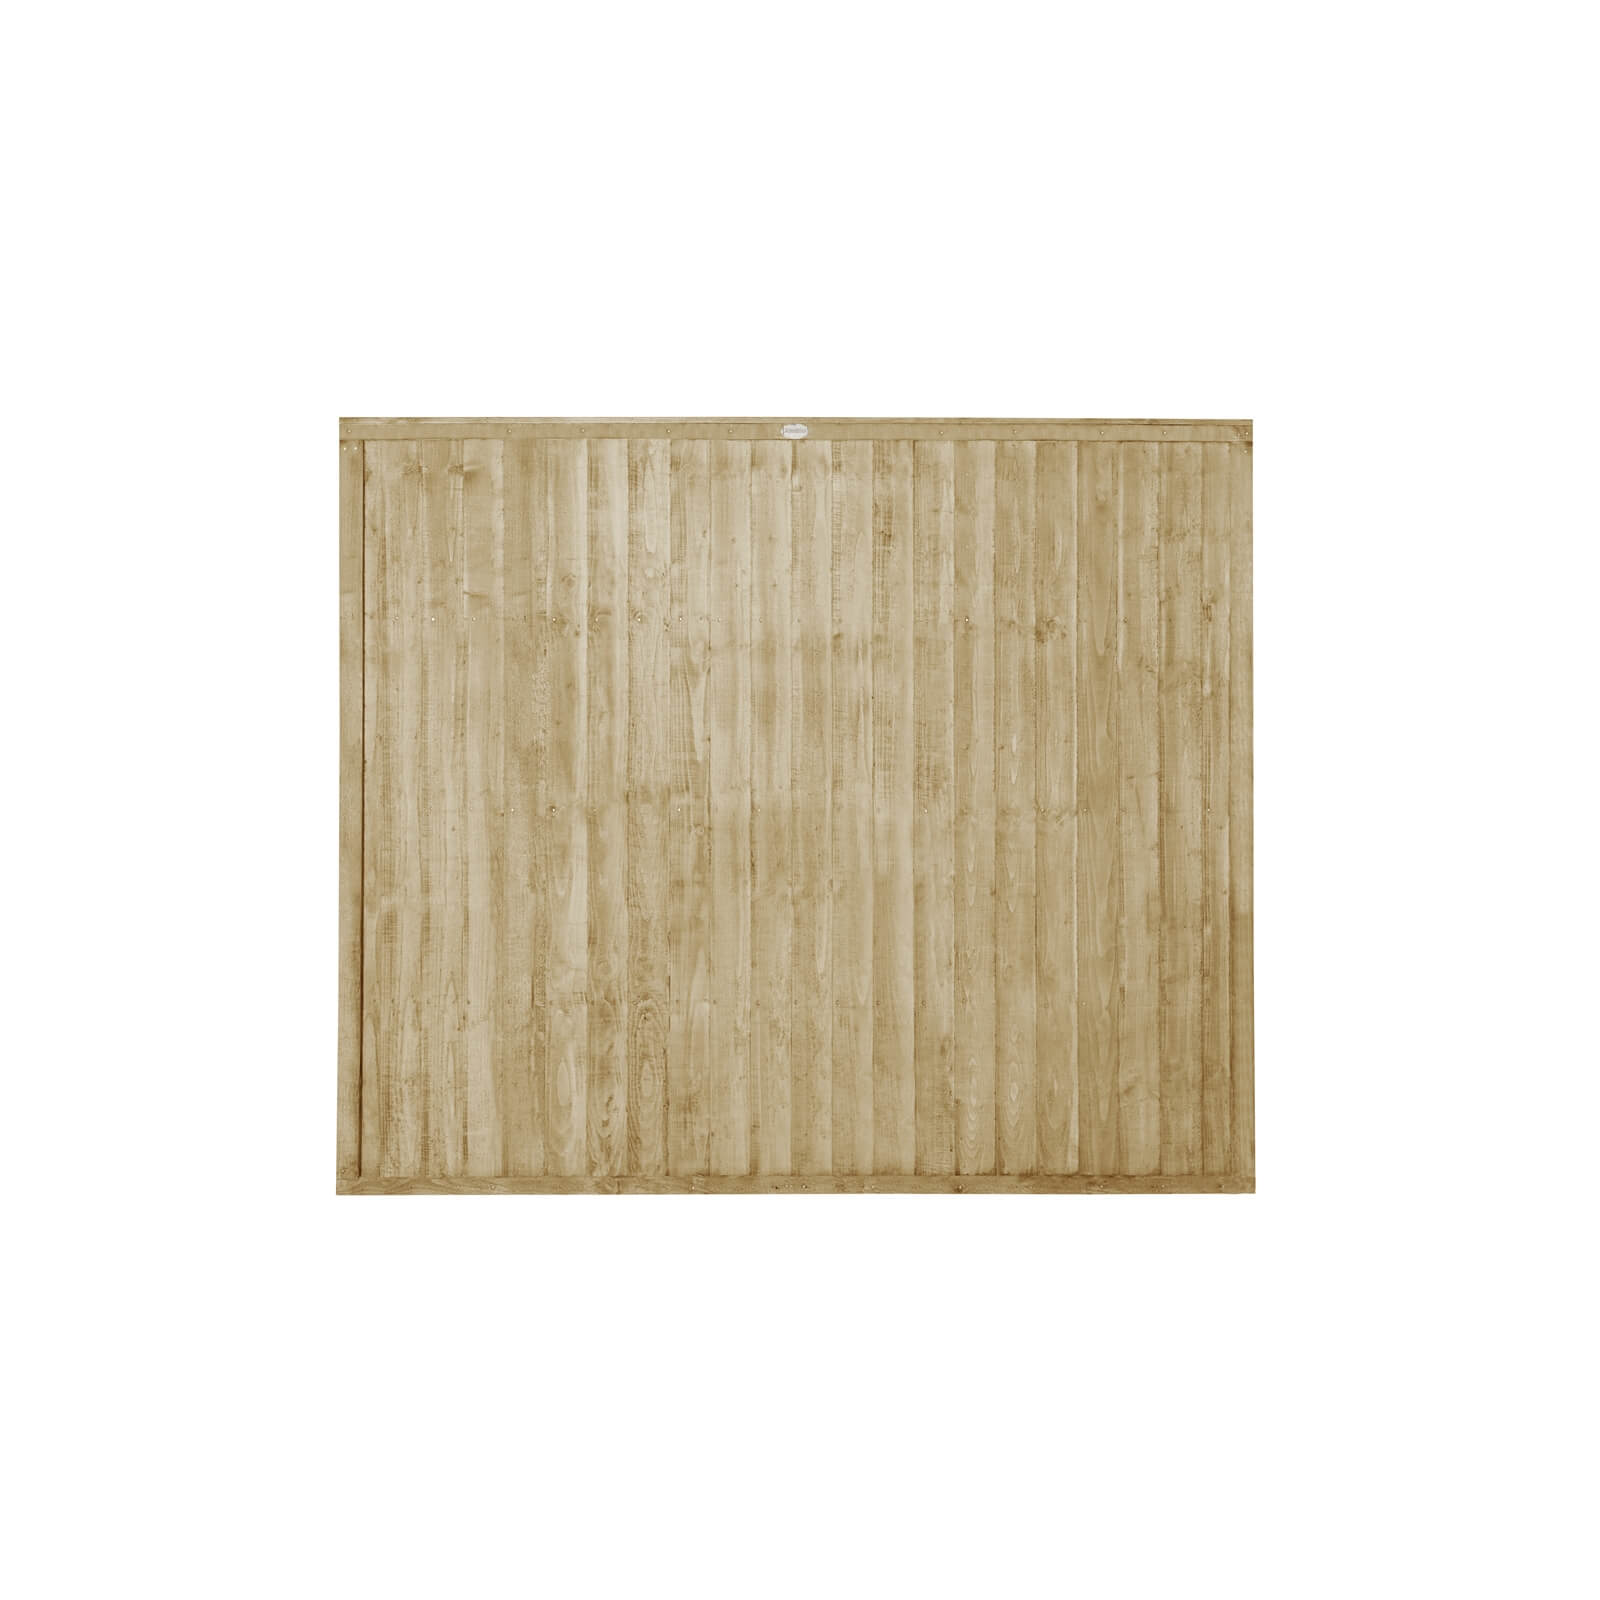 6ft x 5ft (1.83m x 1.52m) Pressure Treated Closeboard Fence Panel - Pack of 20